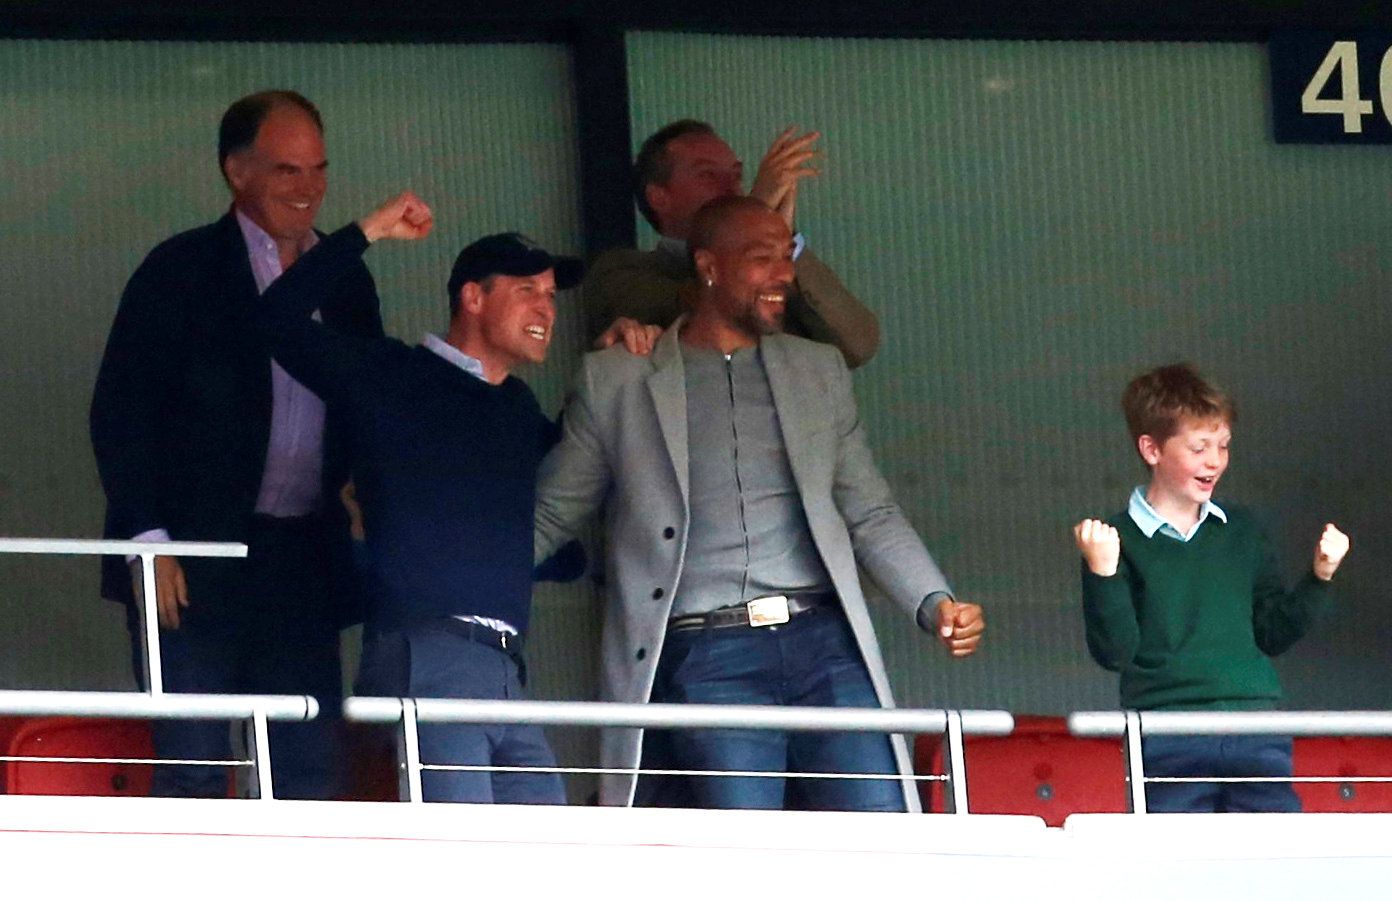 Soccer Football - Championship Playoff Final - Aston Villa v Derby County - Wembley Stadium, London, Britain - May 27, 2019  Britain's Prince William celebrates Aston Villa's first goal with former player John Carew  Action Images via Reuters/Ed Sykes